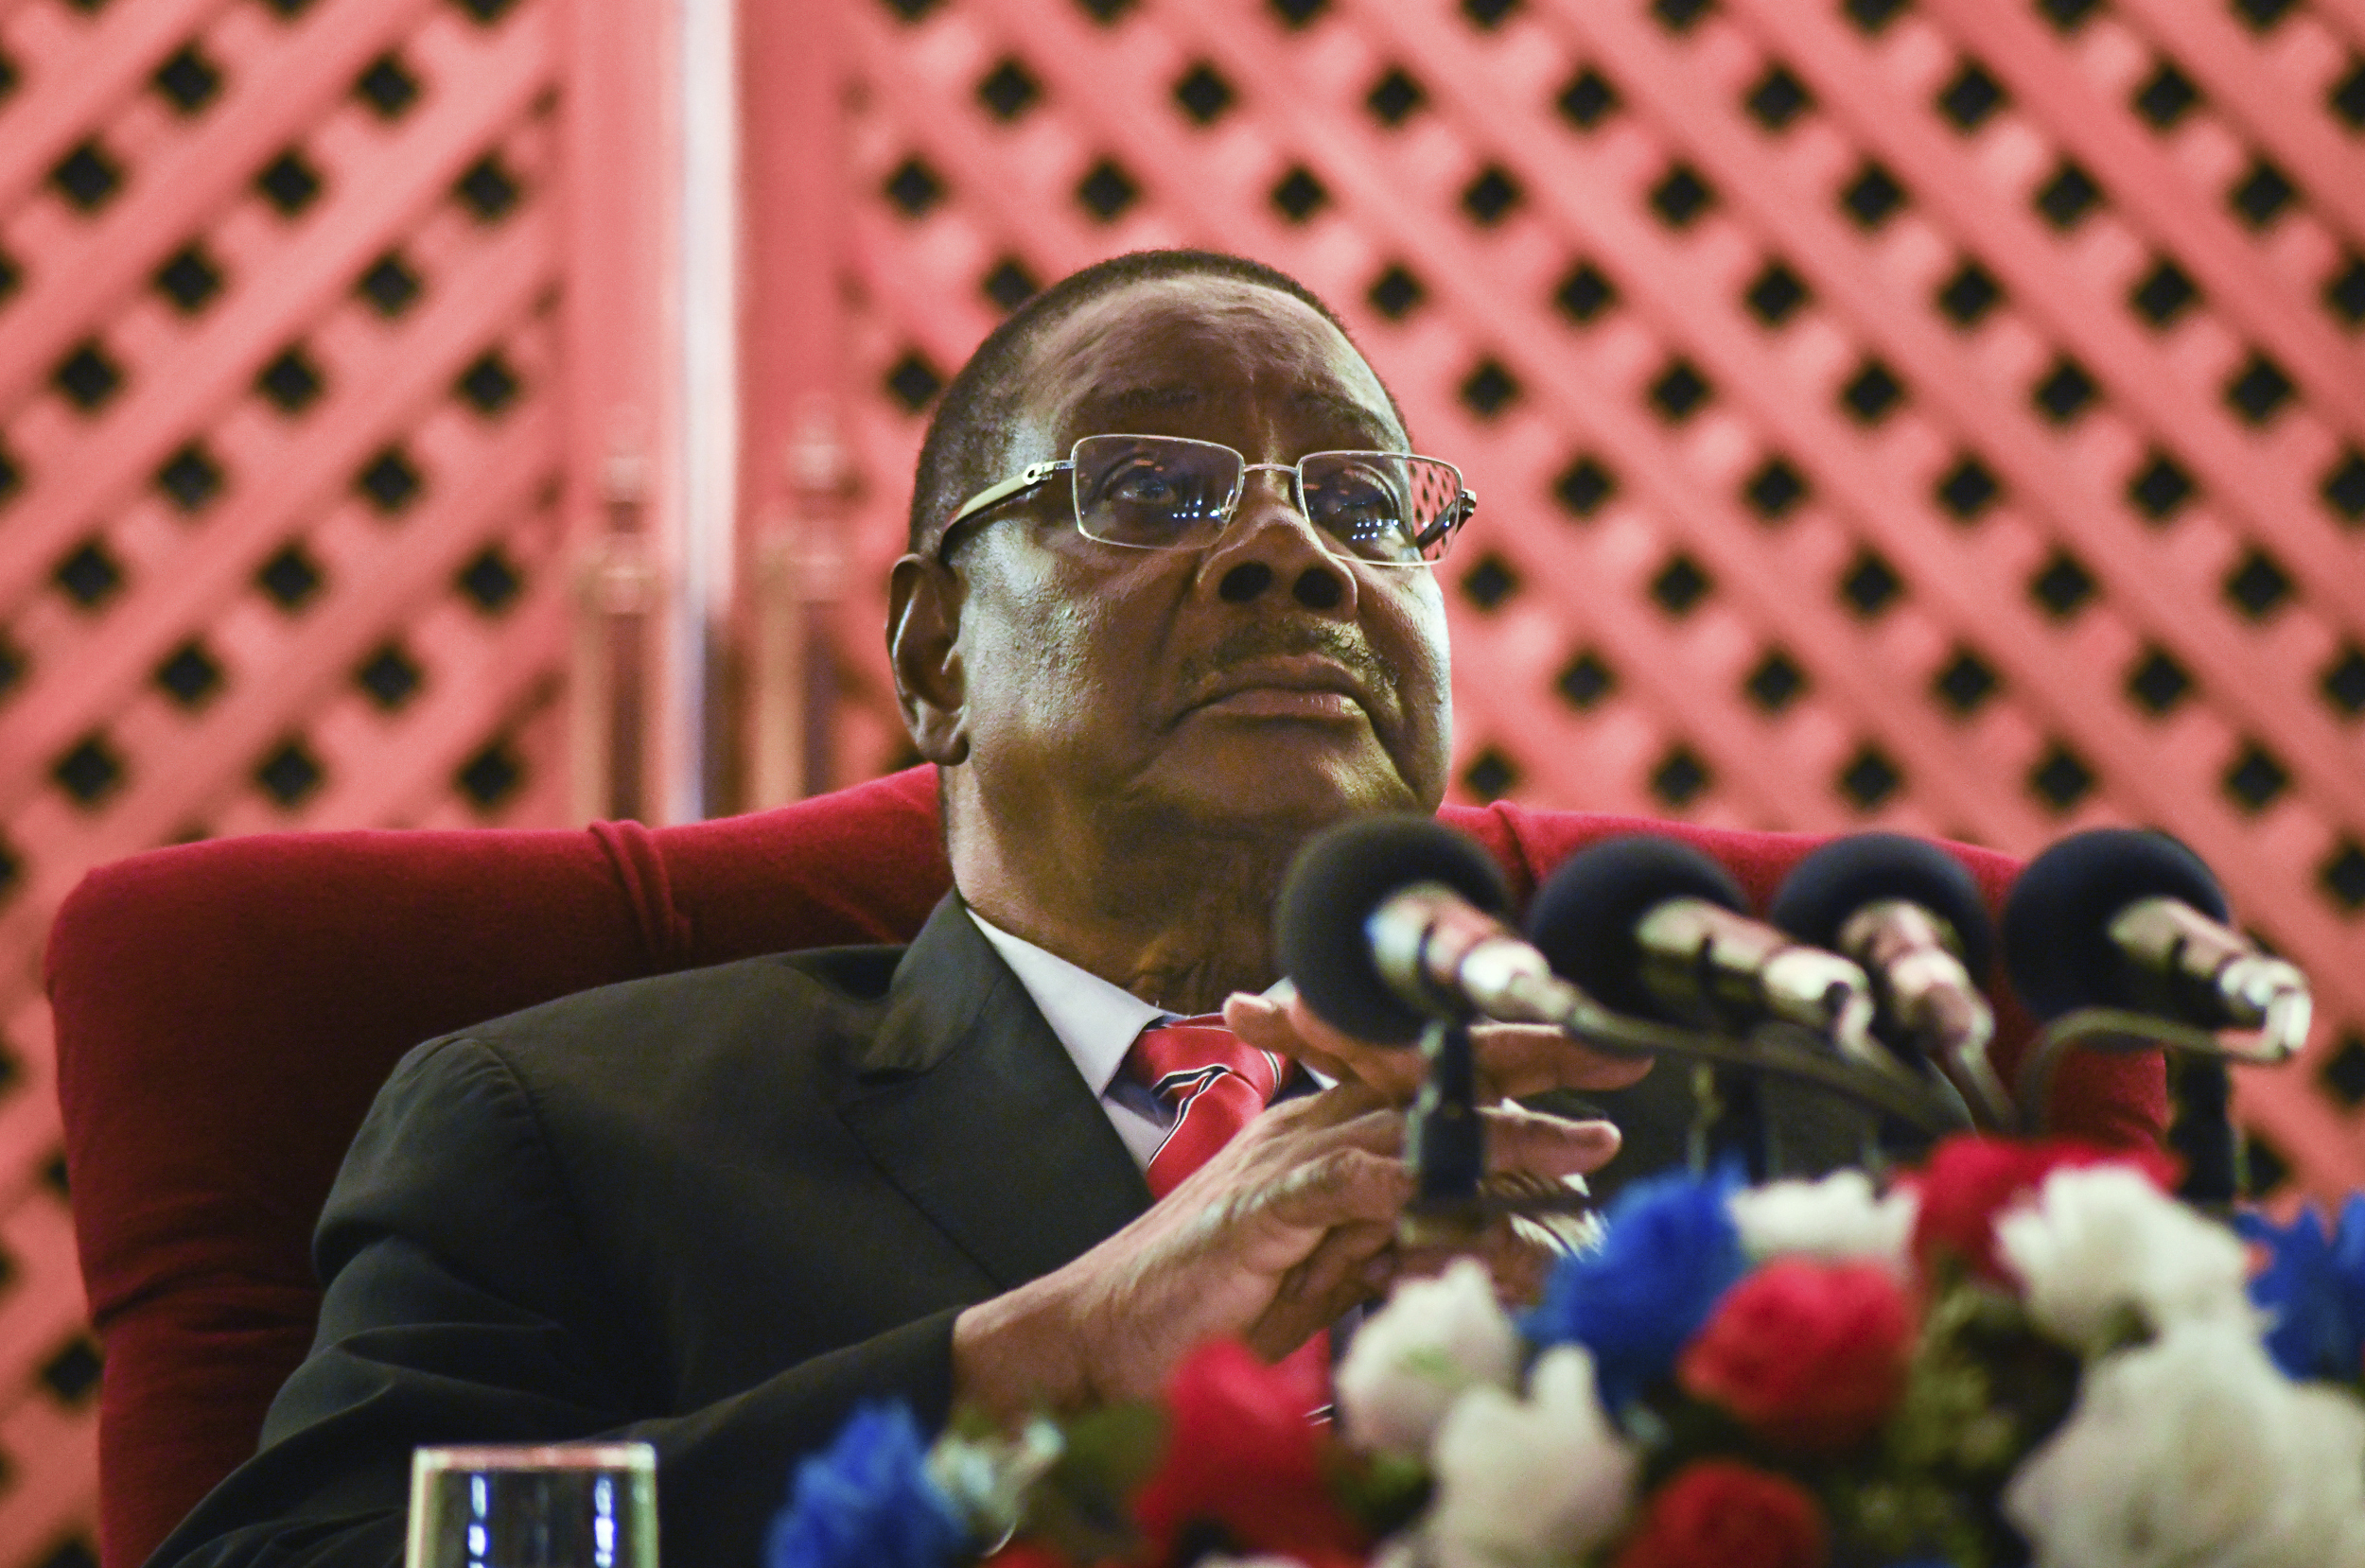 Malawian President Peter Mutharika addresses the media at a news conference in Blantyre, Malawi, Saturday, June 27, 2020. More than 6 million Malawians went to the polls in an election re-run Tuesday, June 23, 2020, after a court overturned last year's election results and ordered a fresh vote. Photo: AP